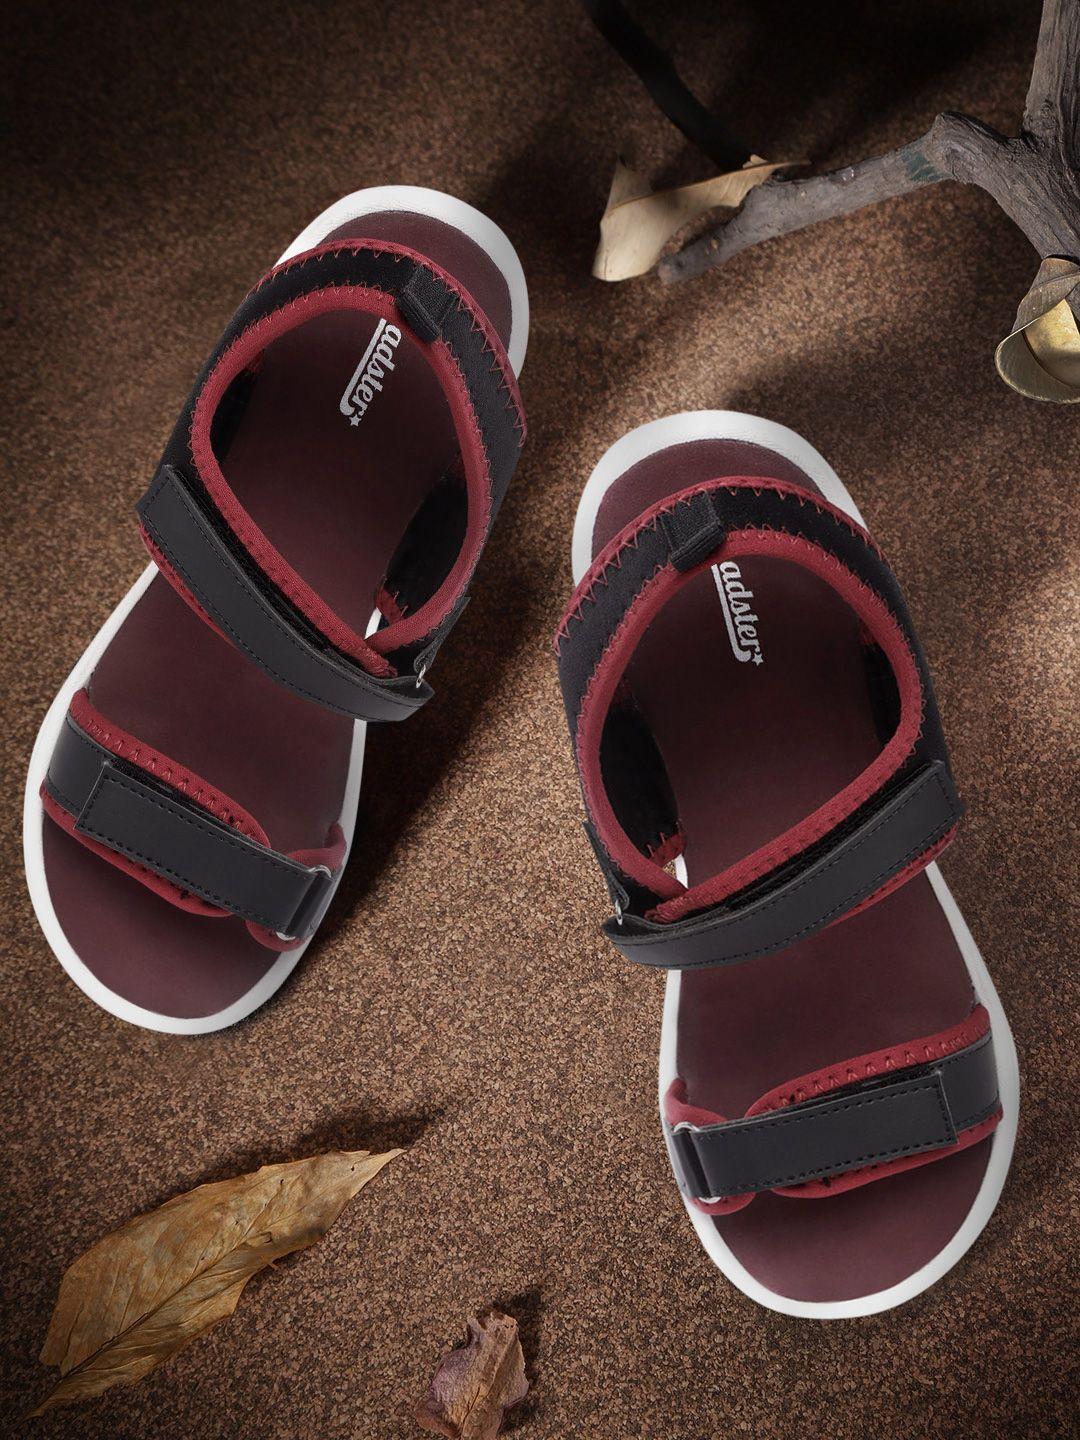 the-roadster-lifestyle-co-women-black-&-maroon-solid-sports-sandals